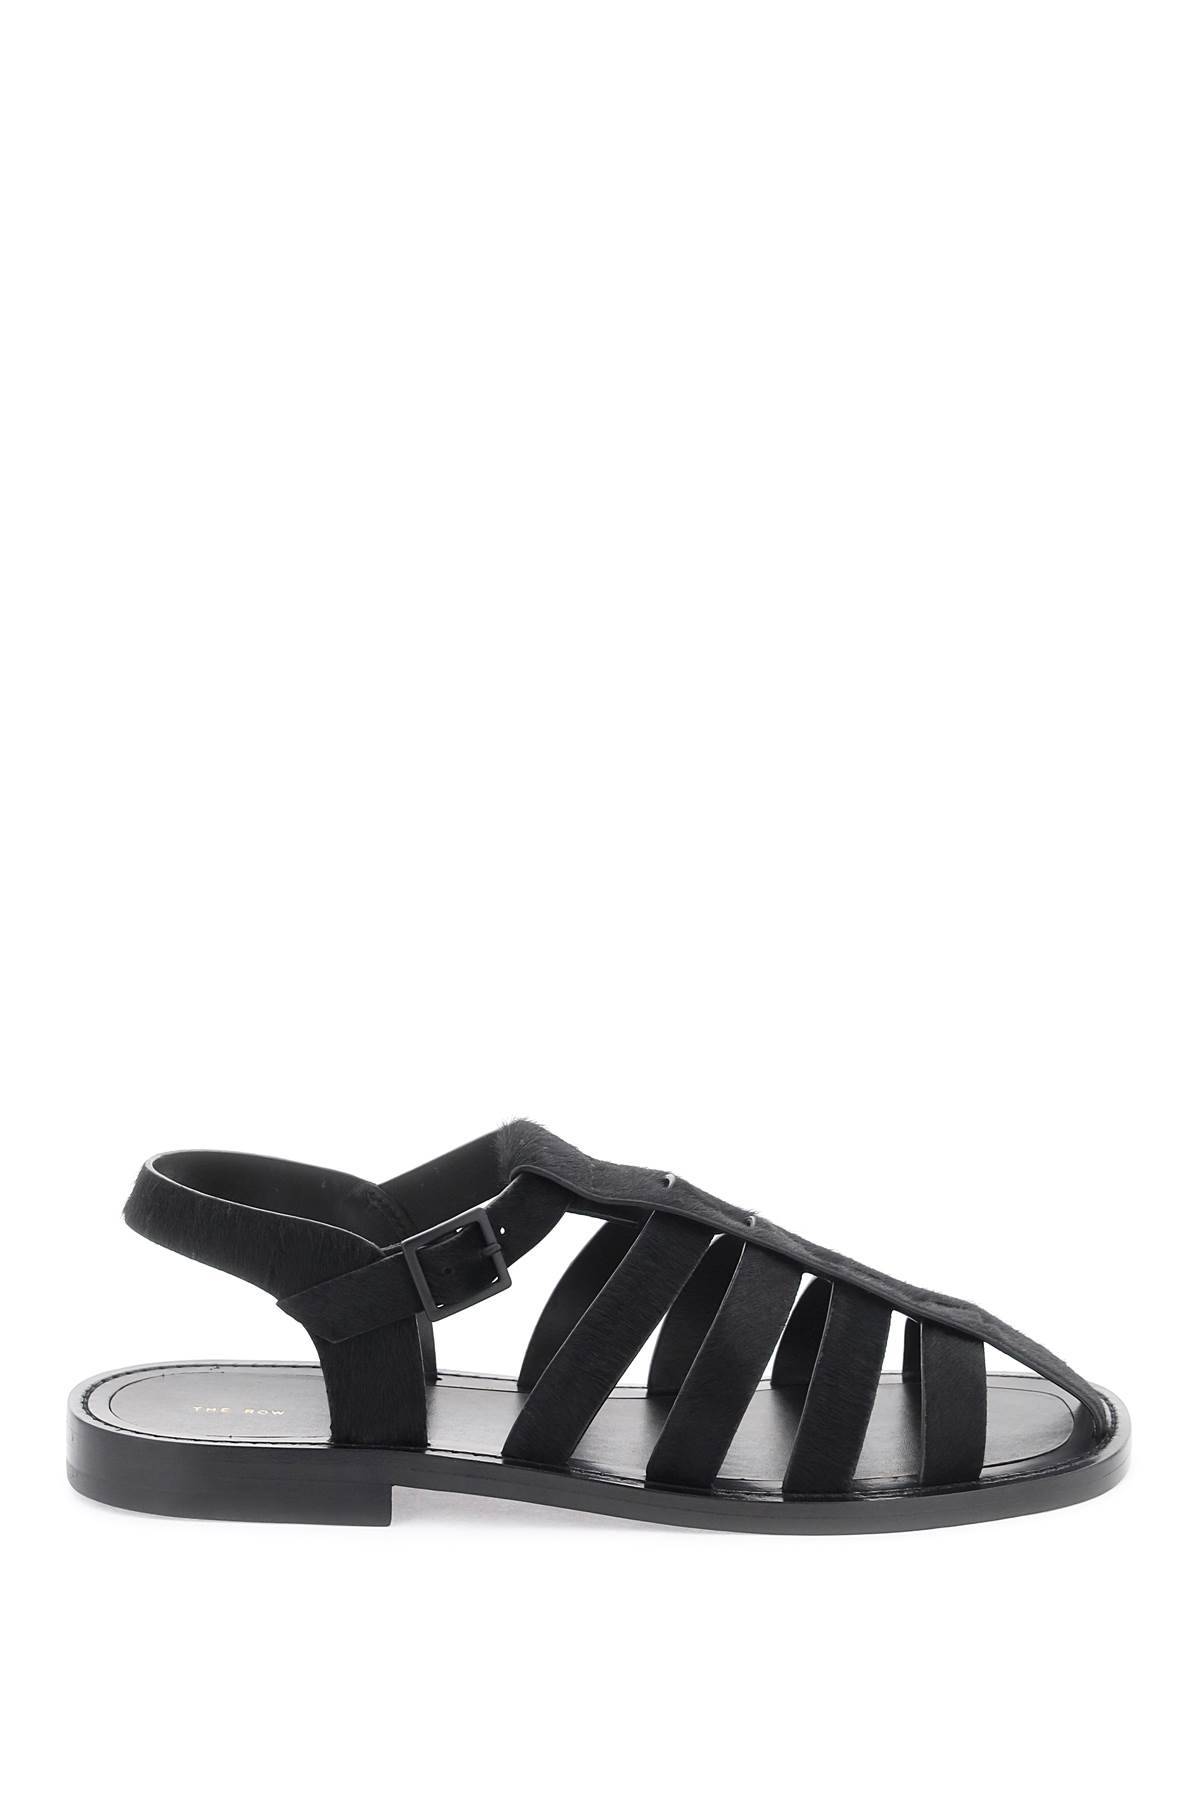 The Row THE ROW 'pablo' sandals